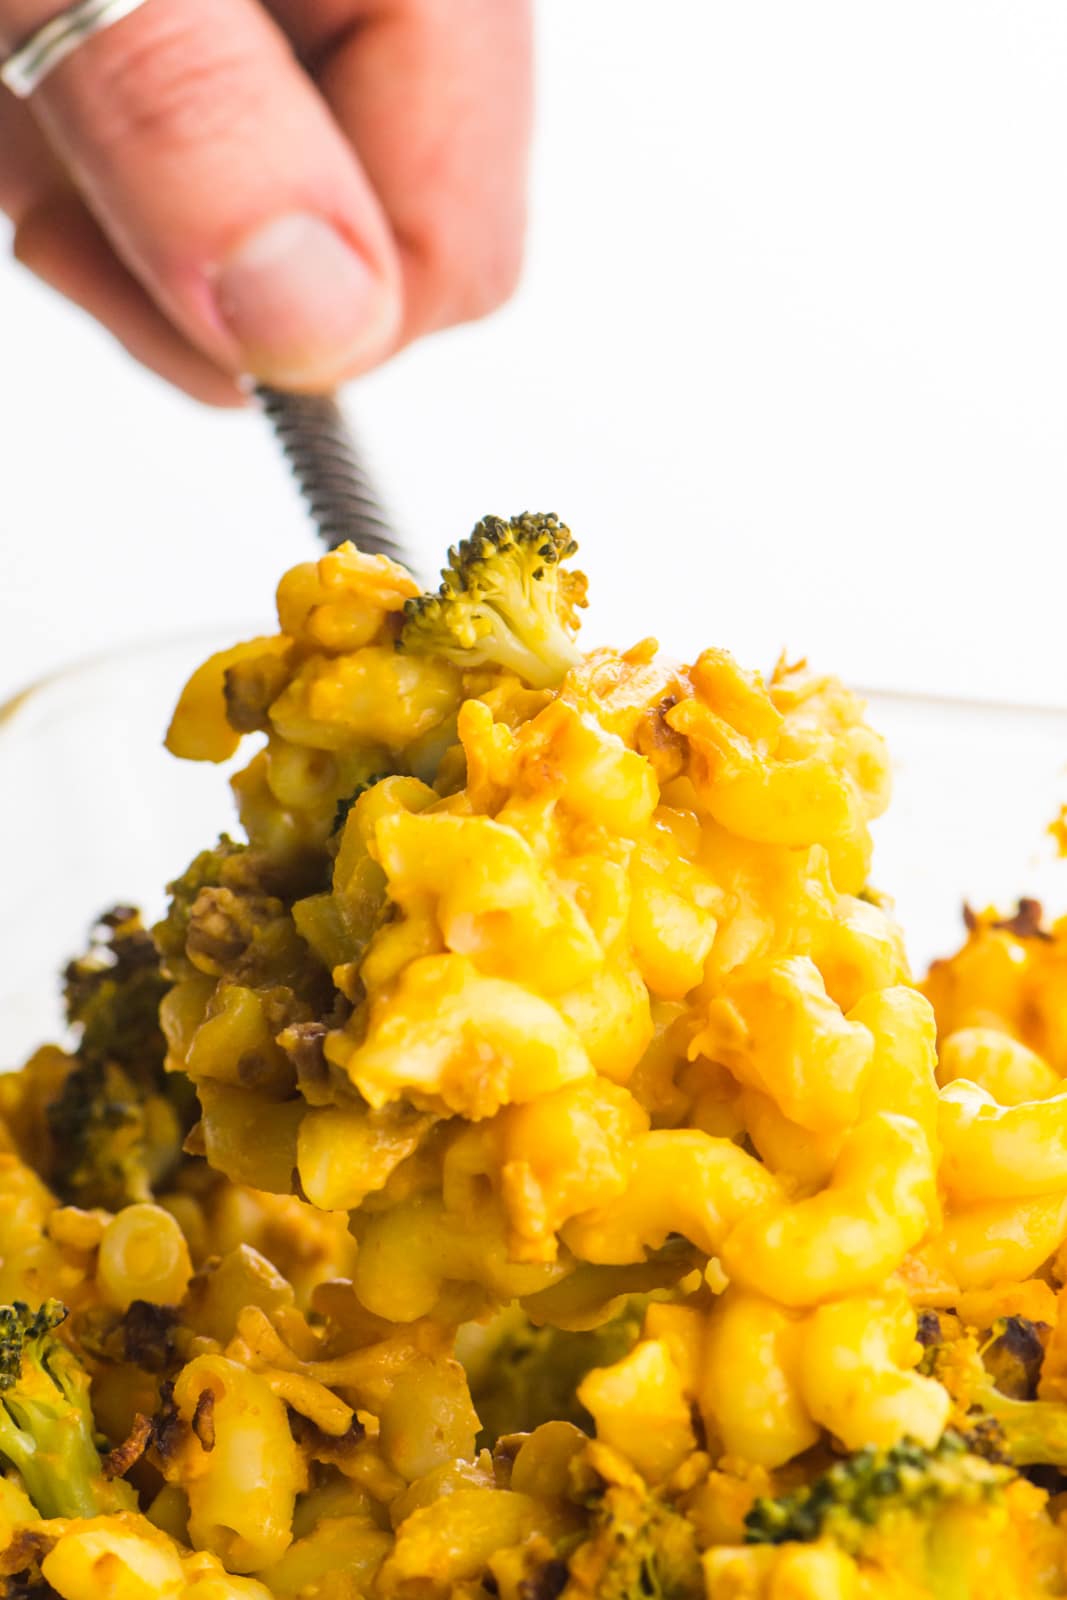 A hand reaches in and scoops out some vegan mac and cheese casserole from the dish.